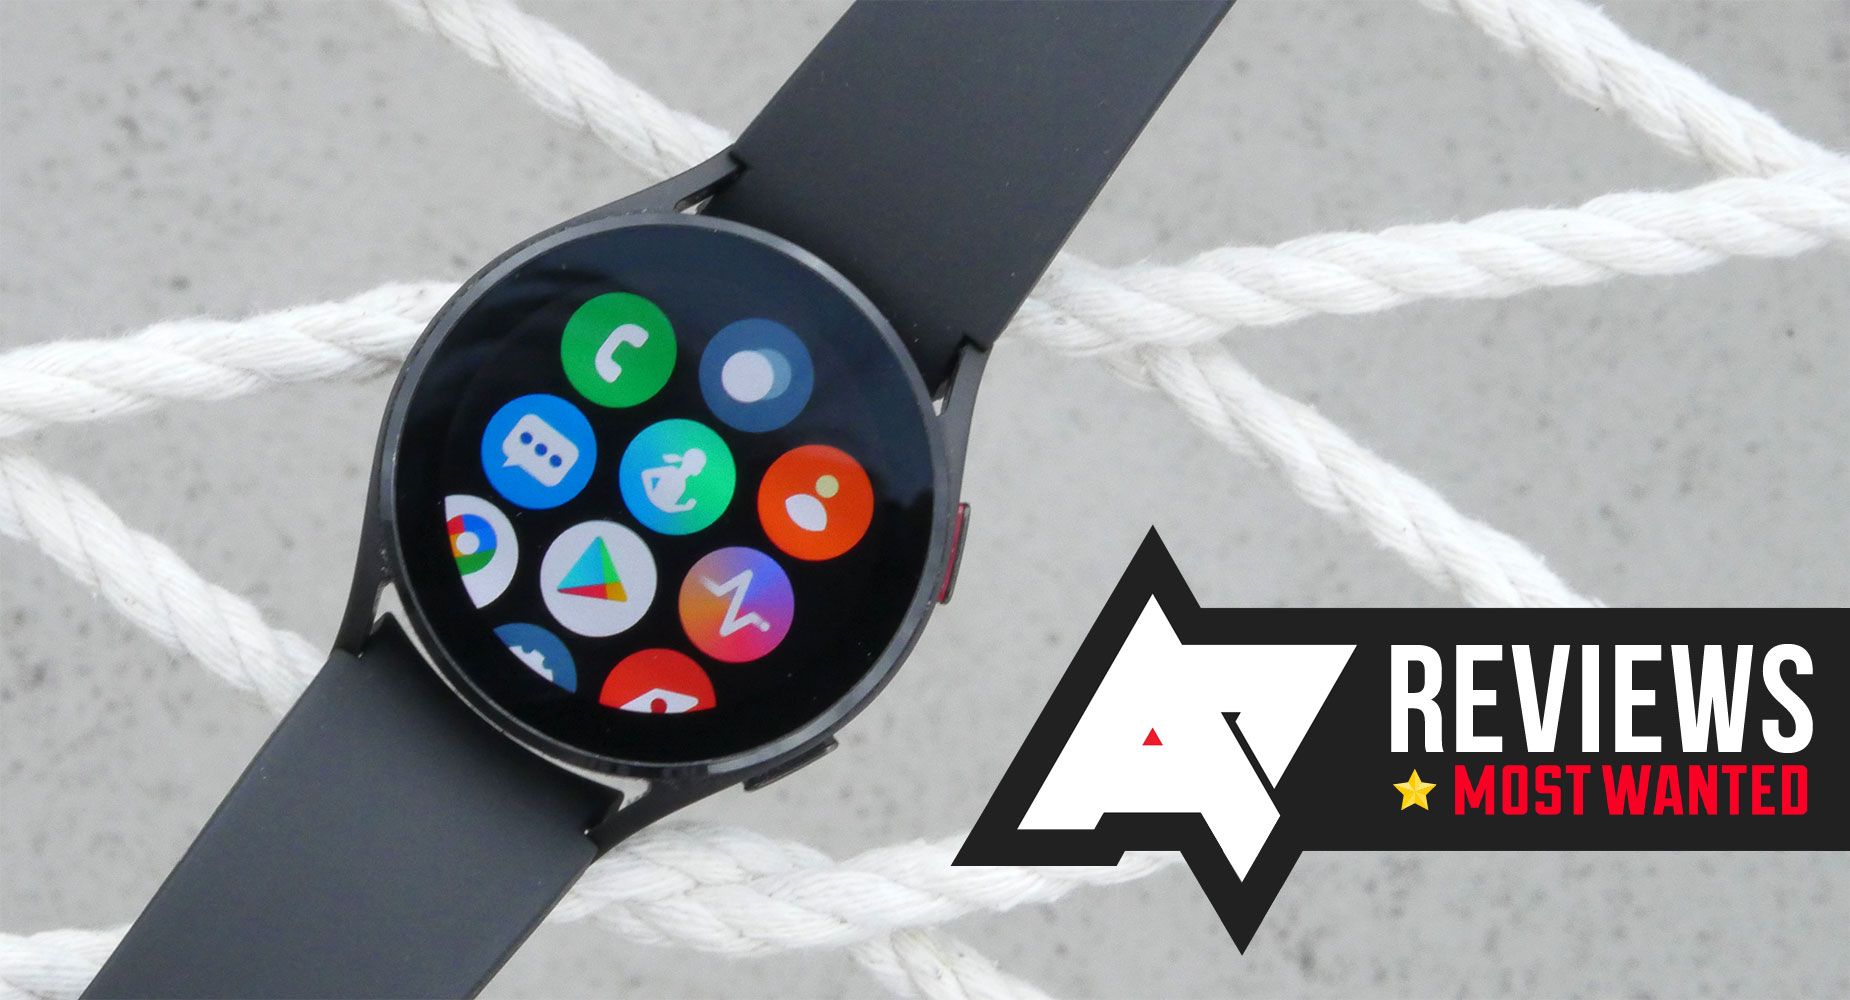 Samsung Galaxy Watch 4 review: The standard for Android smartwatches